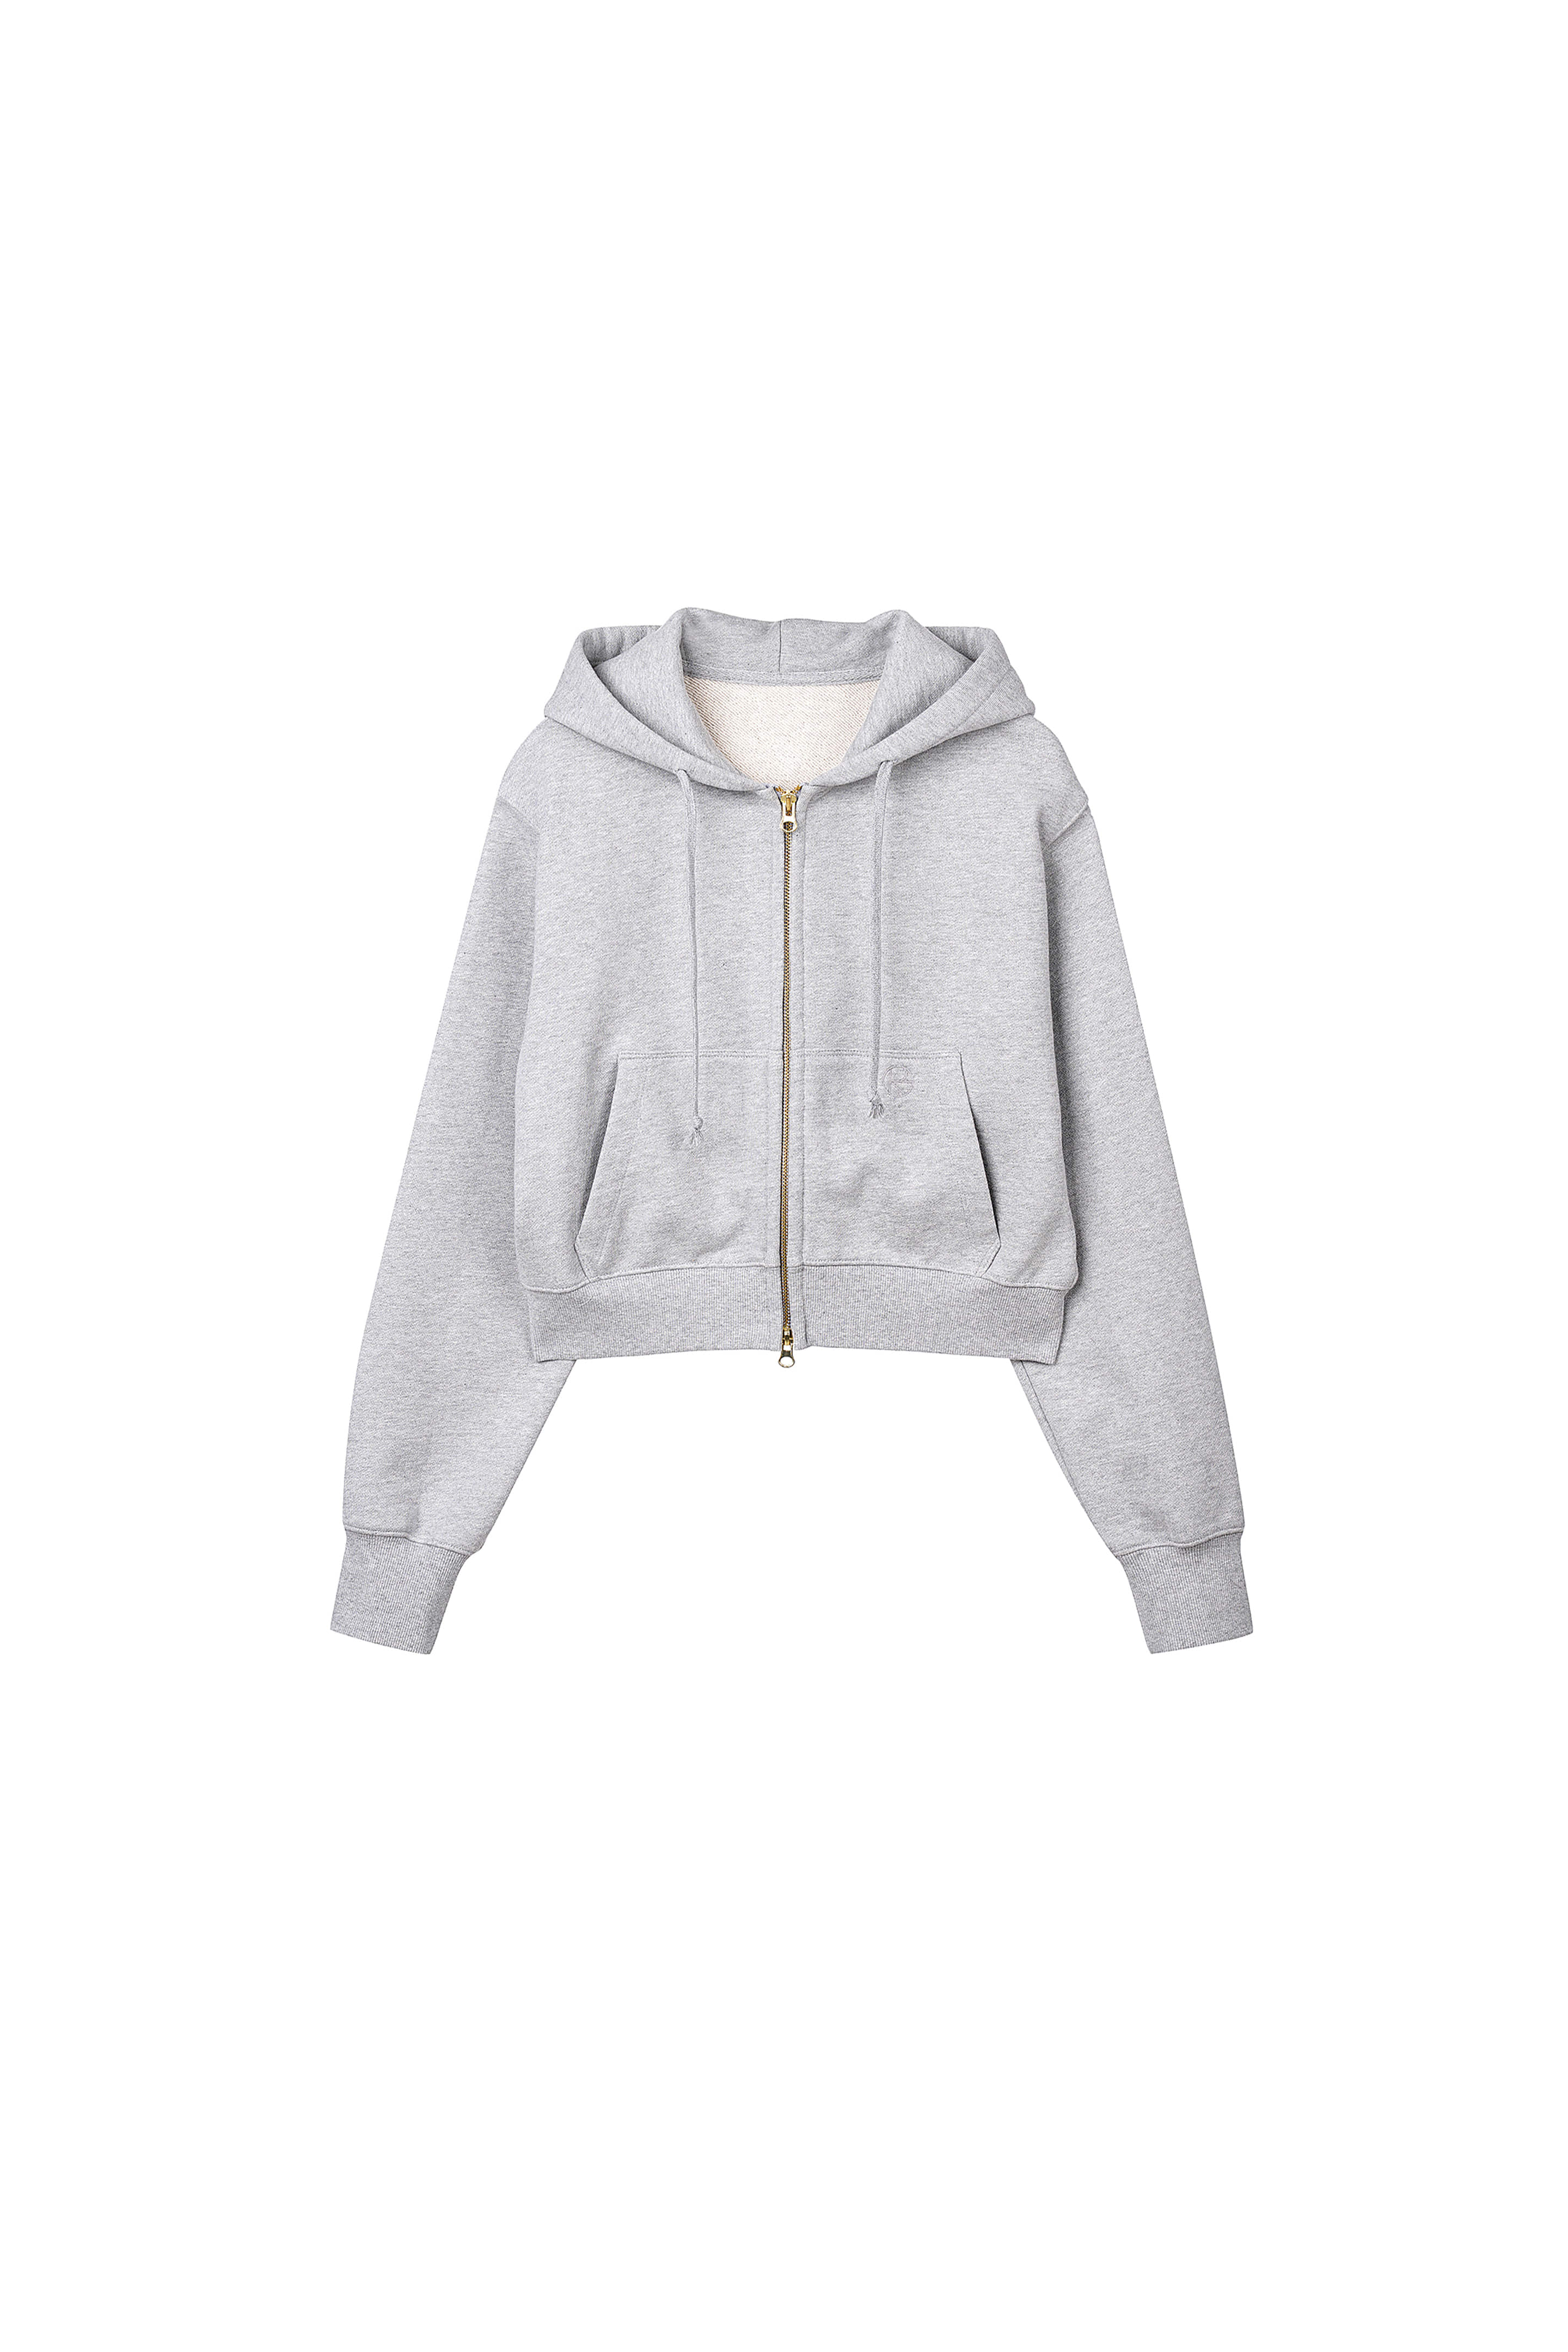 2nd) ORE COTTON 007 Cropped Hoodie Jumper M.Grey